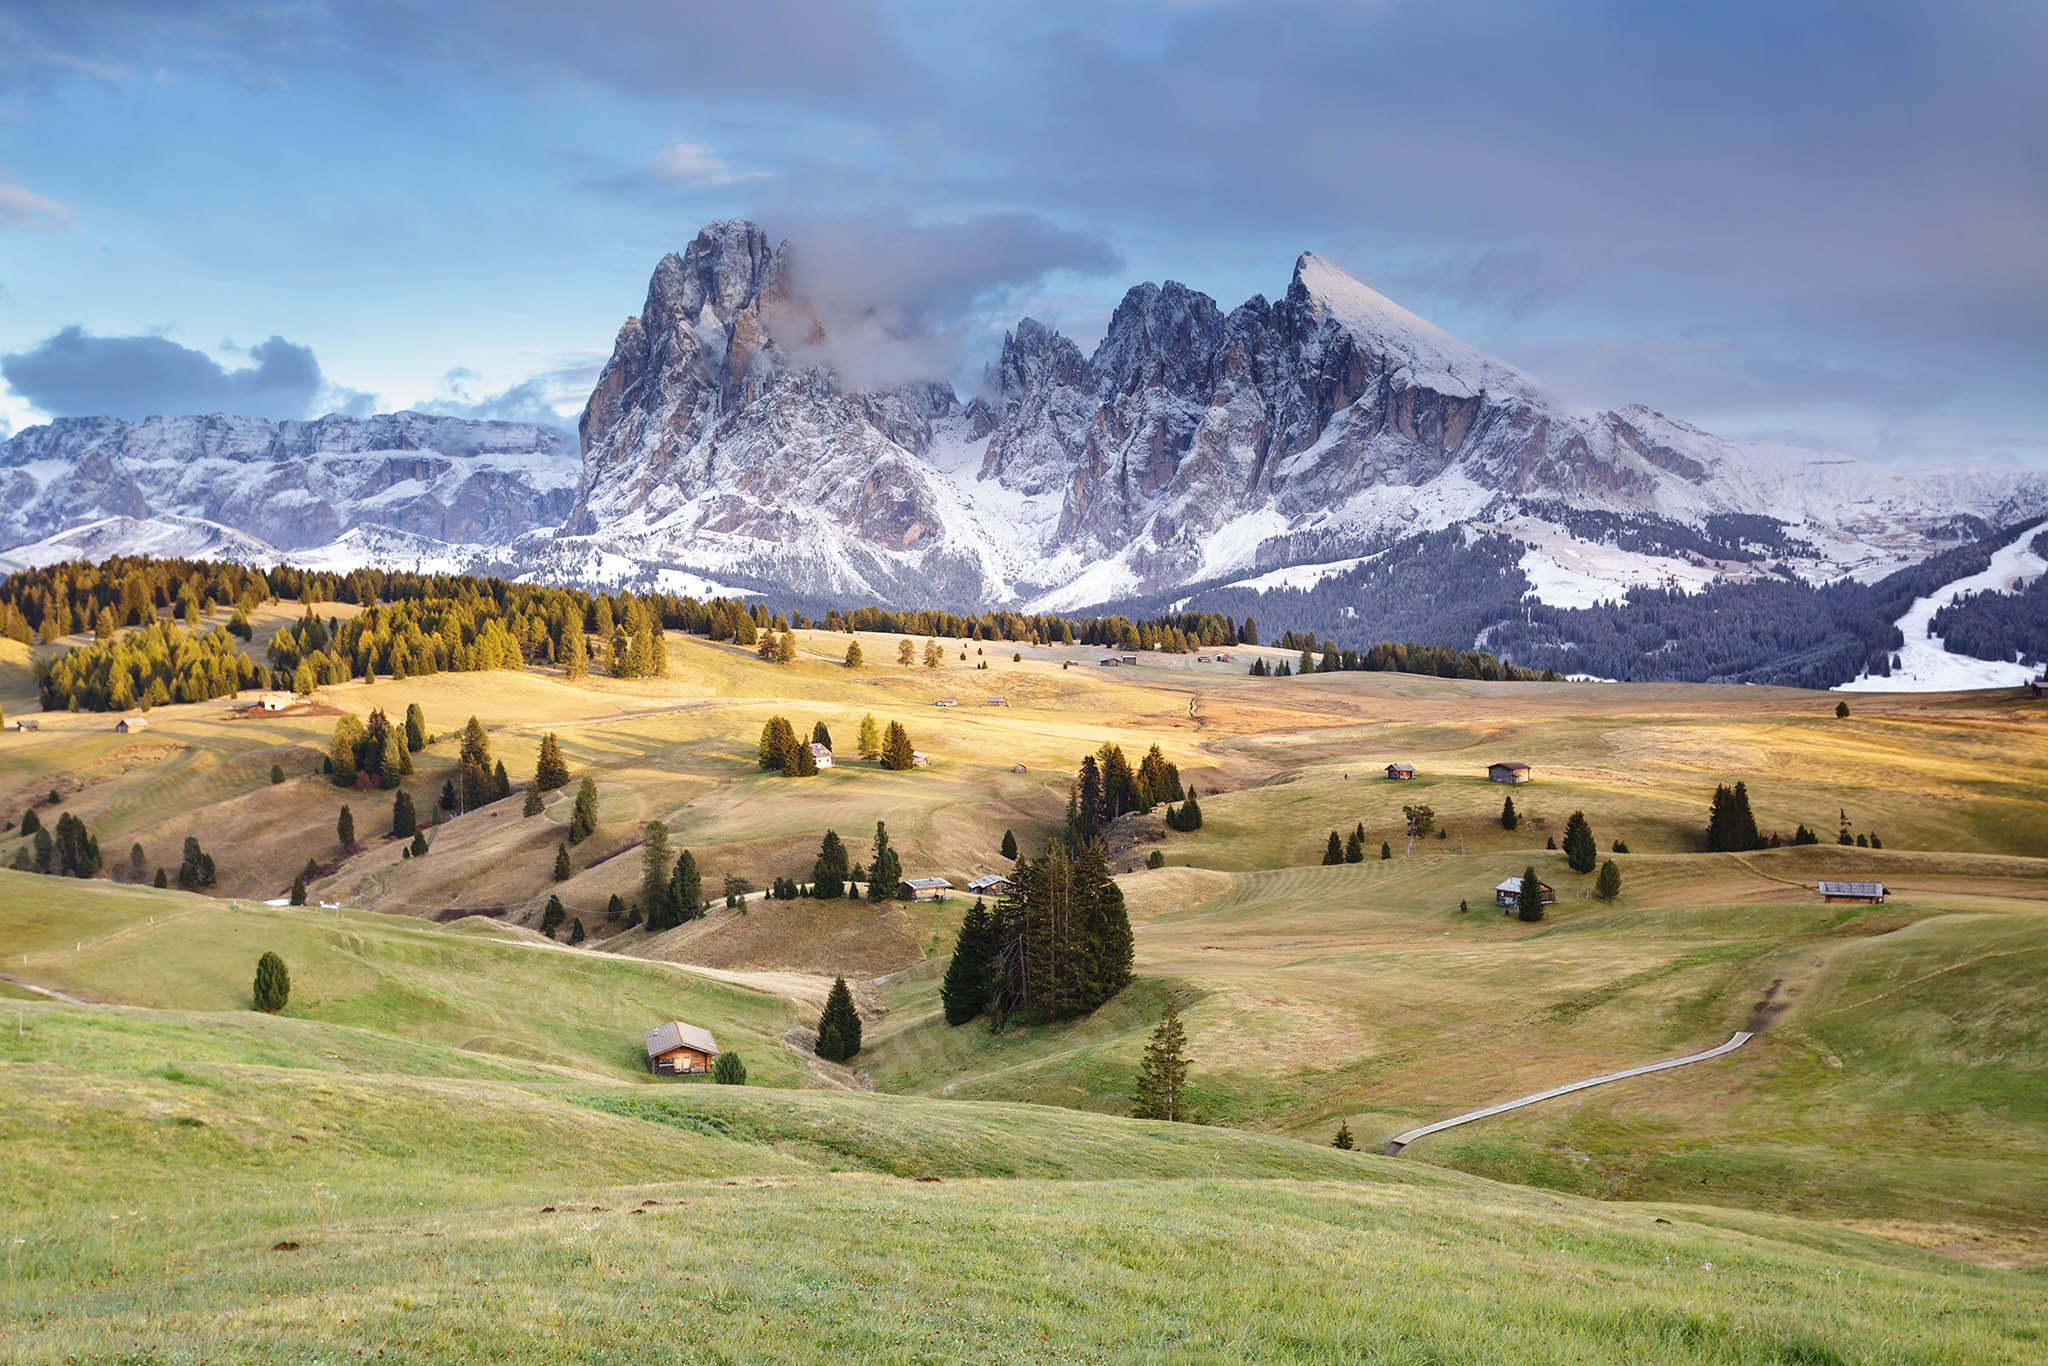 Alpe Di Siusi (Seiser Alm), Dolomites, Italy. The largest high altitude Alpine meadow in Europe, the Alpe di Siusi is in Italy’s South Tyrol.